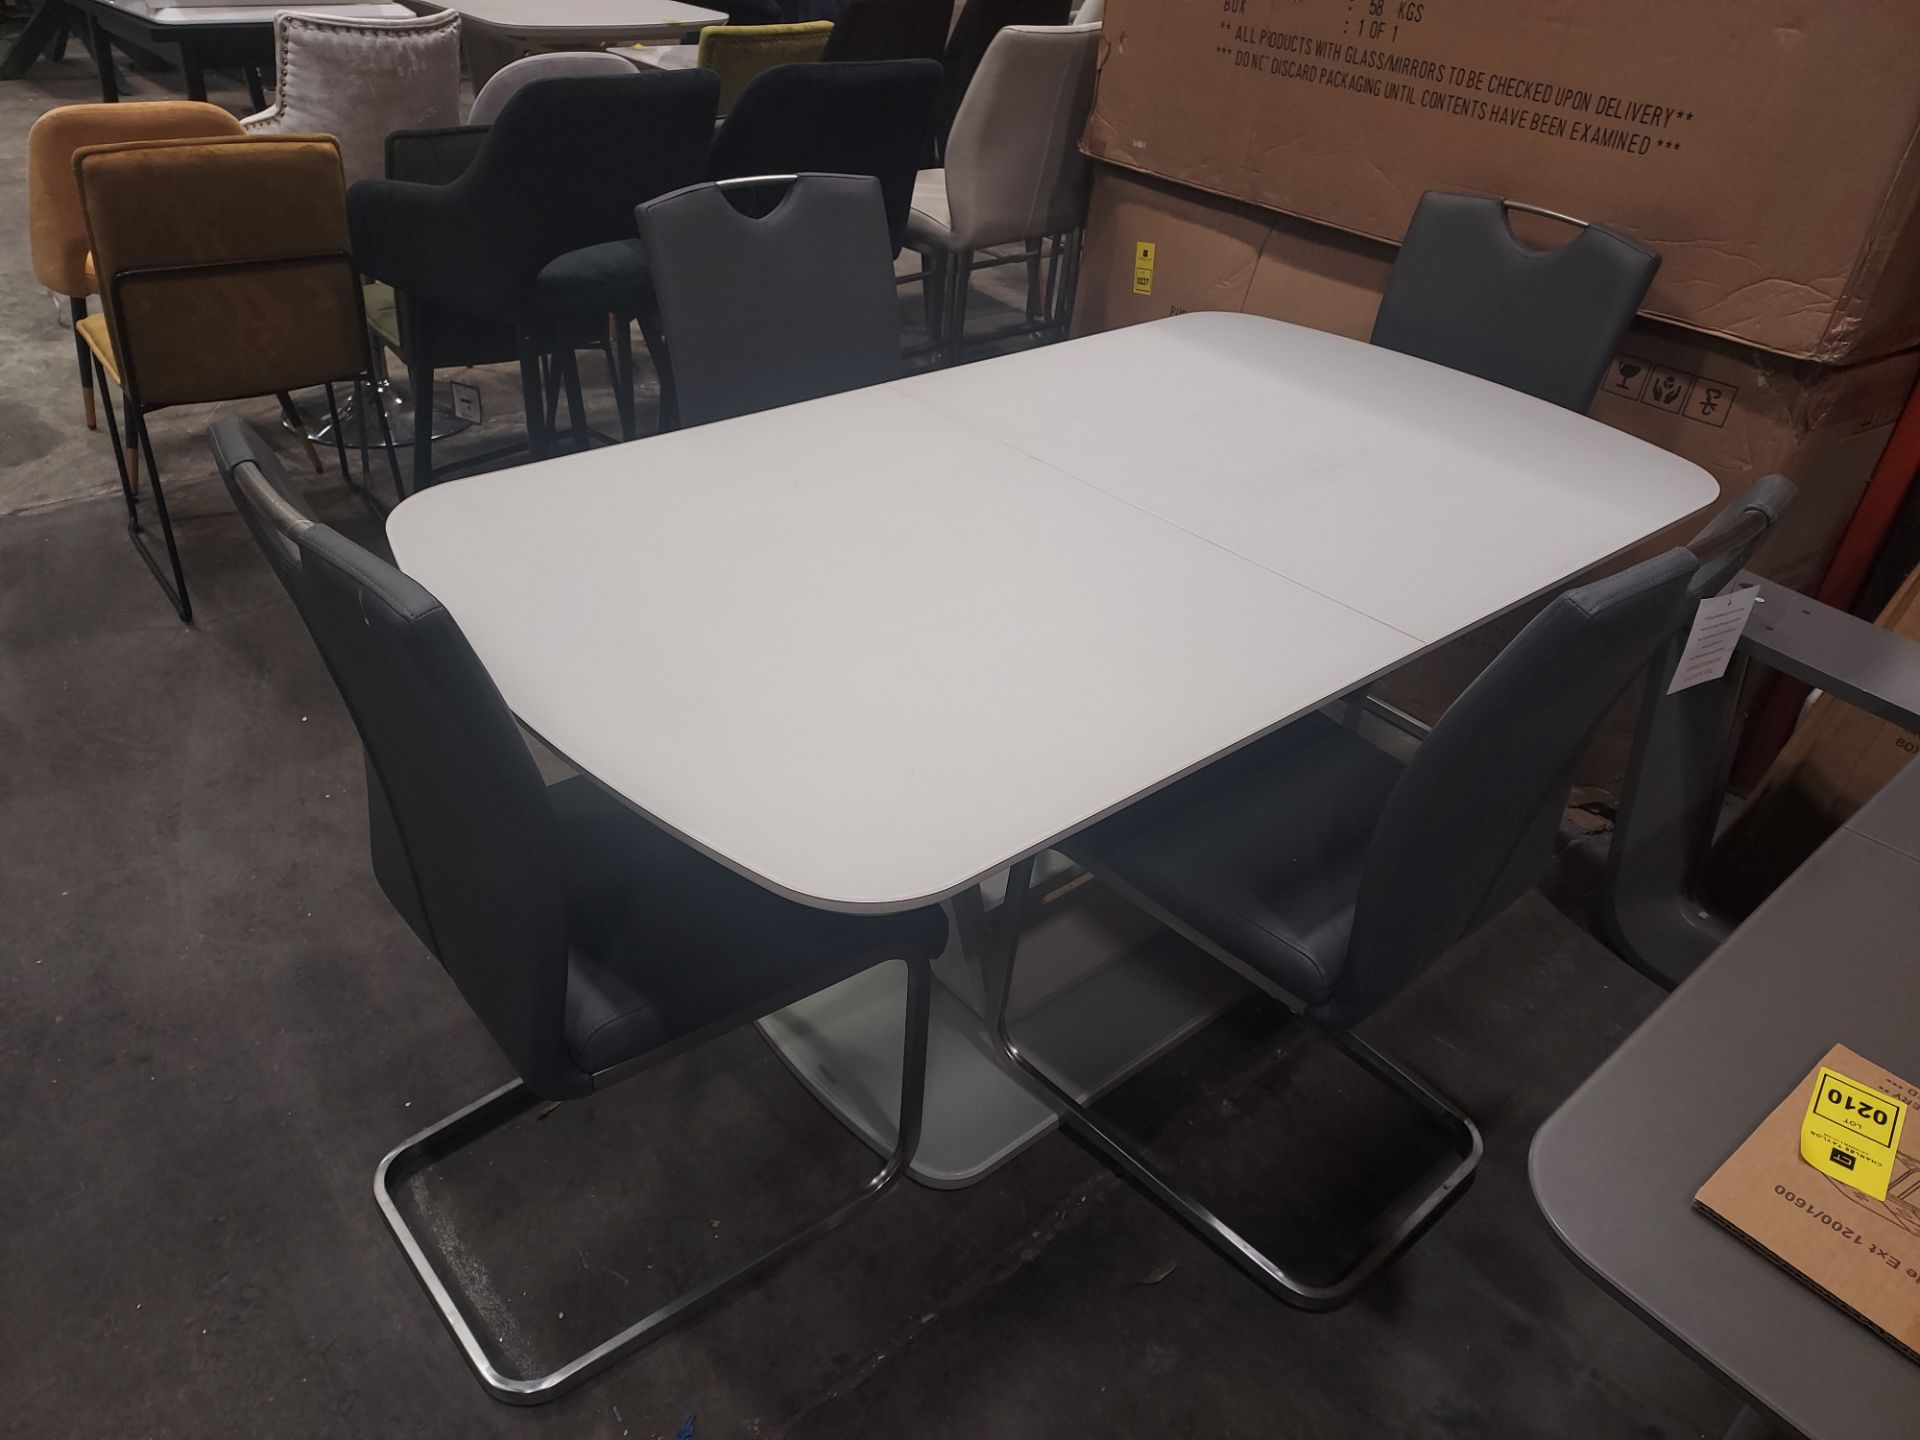 1 X LAZZARO DINING TABLE IN LIGHT GREY EXTENDING 1600/2000 X 900mm WITH 4 X LEATHER DINING CHAIRS (